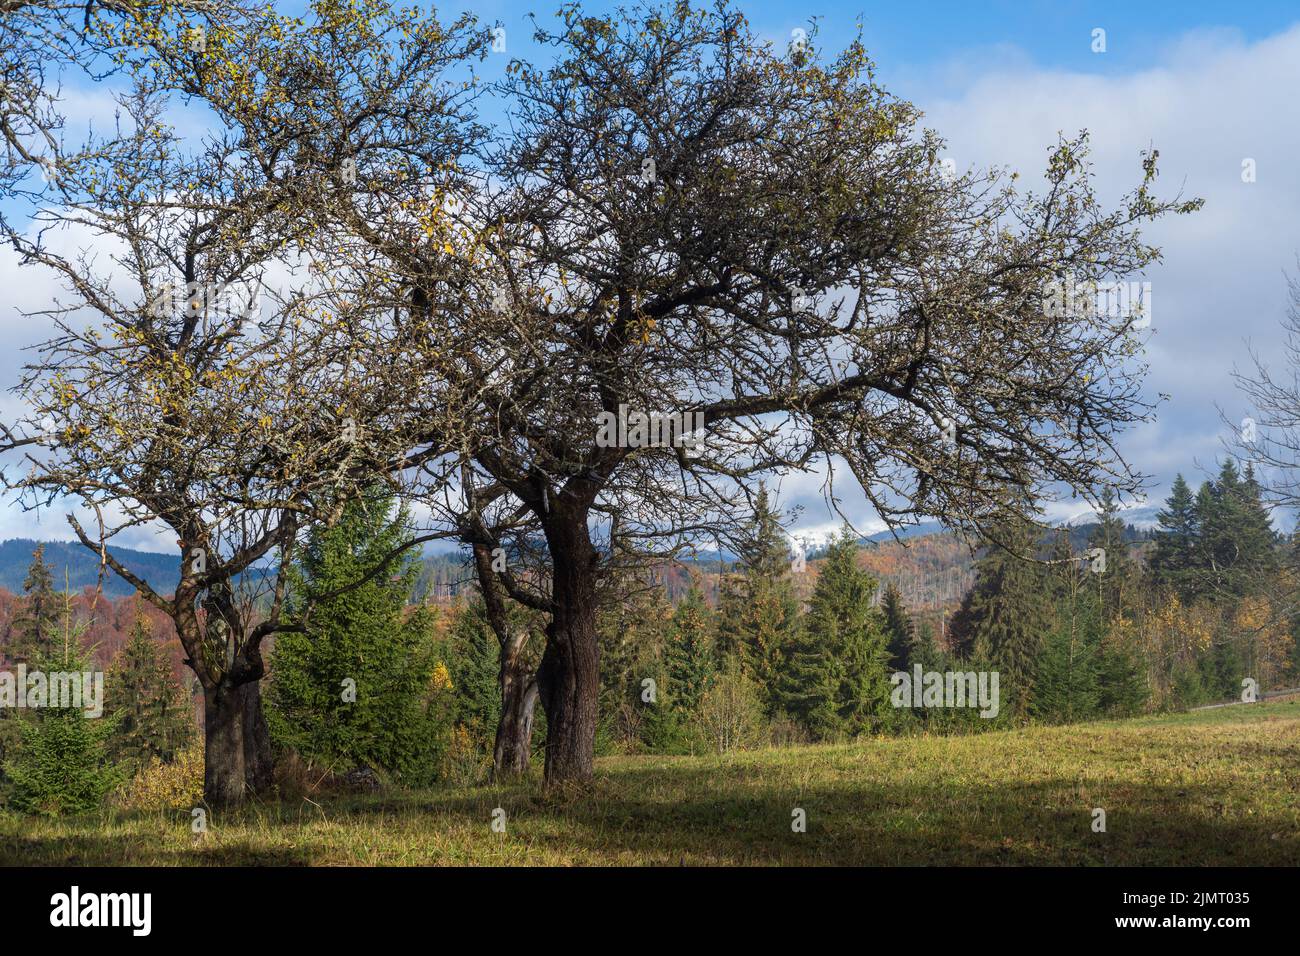 Cloudy and foggy morning late autumn mountains scene with old apple tree in front. Peaceful picturesque traveling, seasonal, nat Stock Photo